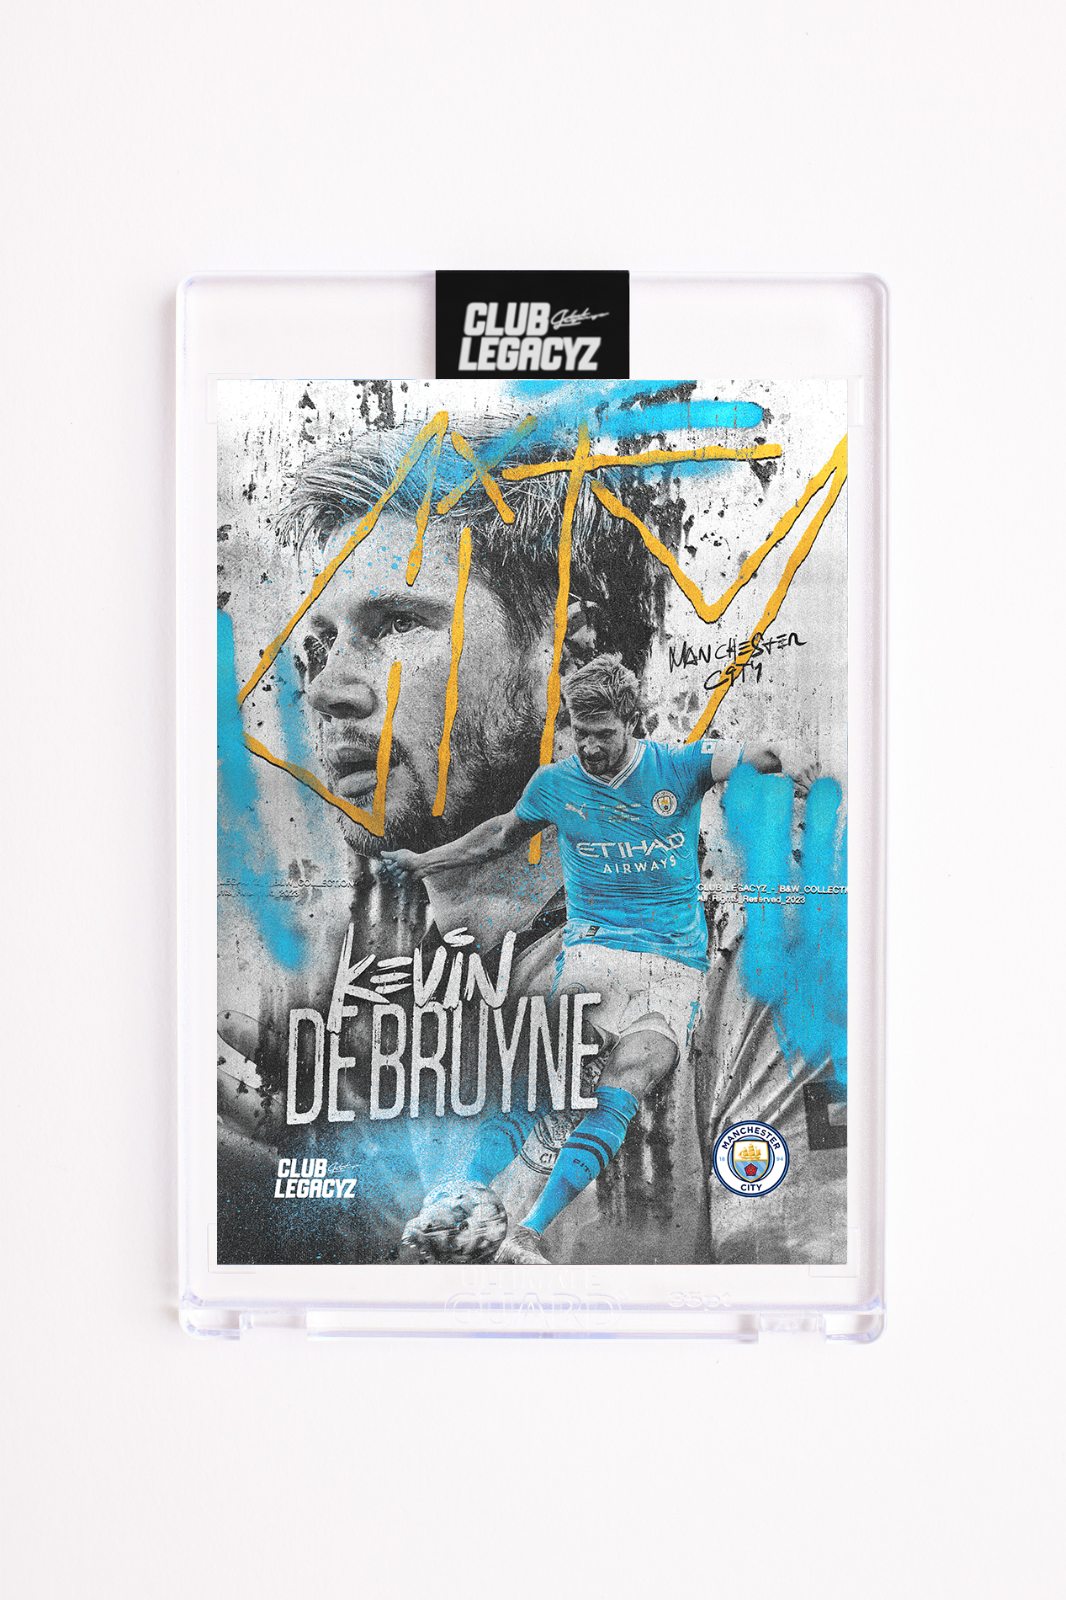 Manchester City - Kevin de Bruyne Black & White Icon limited to 100